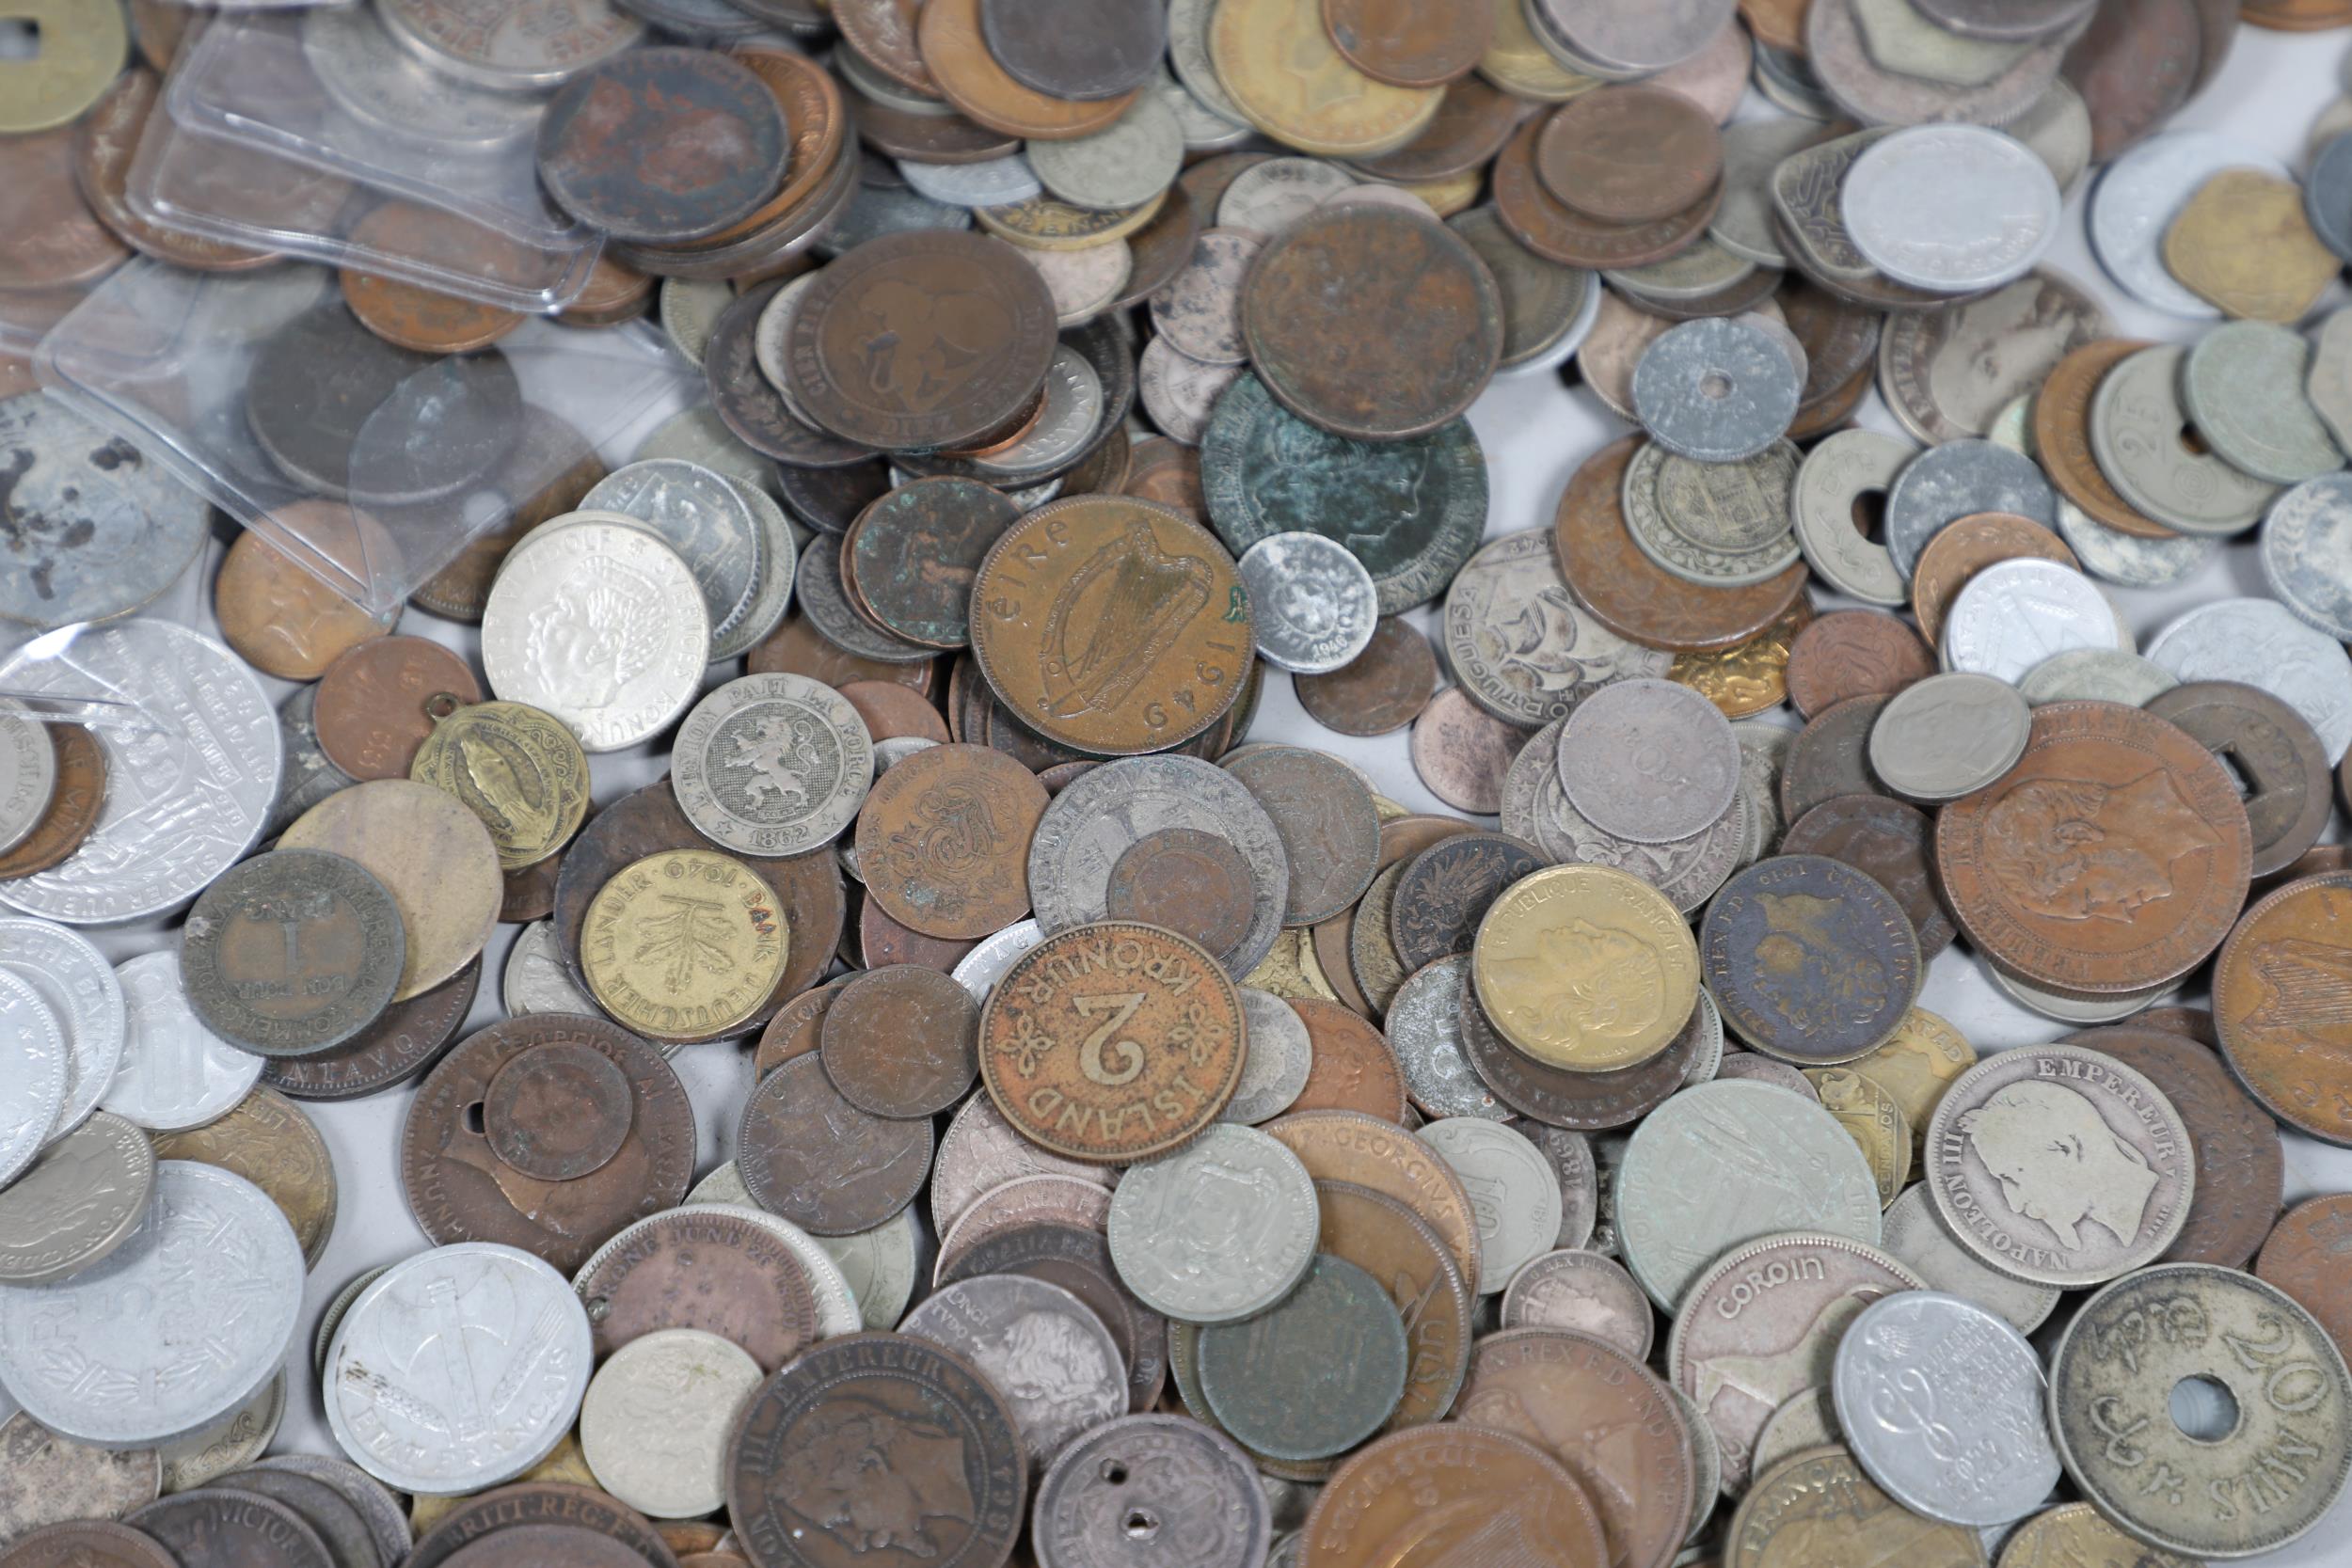 A LARGE COLLECTION OF WORLD COINS AND SIMILAR BRITISH COINS. - Image 14 of 20